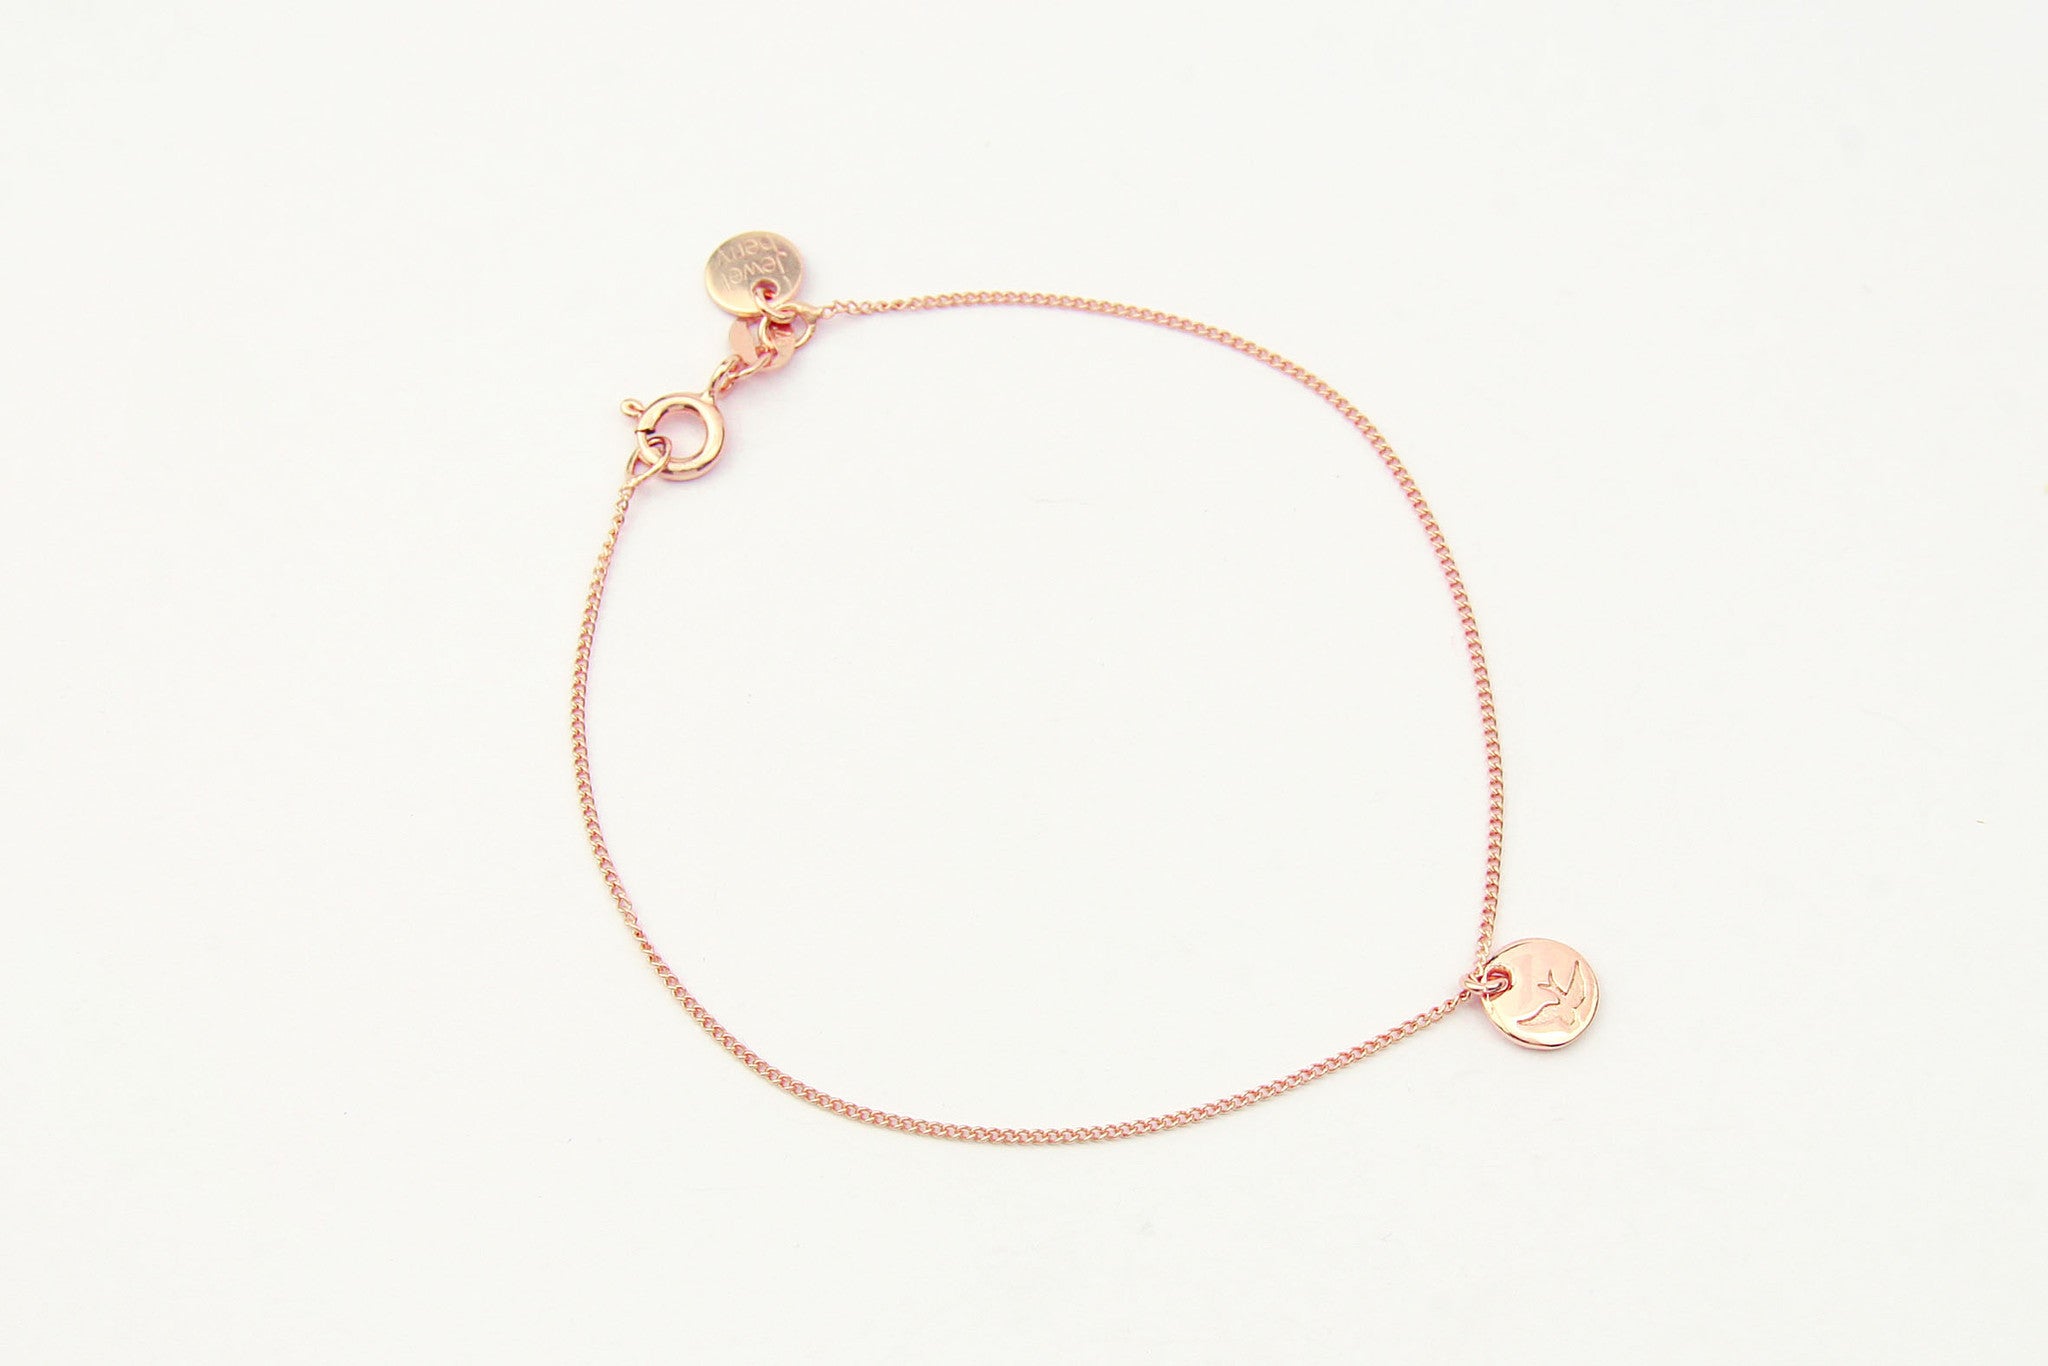 jewelberry armband bracelet bird token rose gold plated sterling silver fine jewelry handmade with love fairtrade curb chain